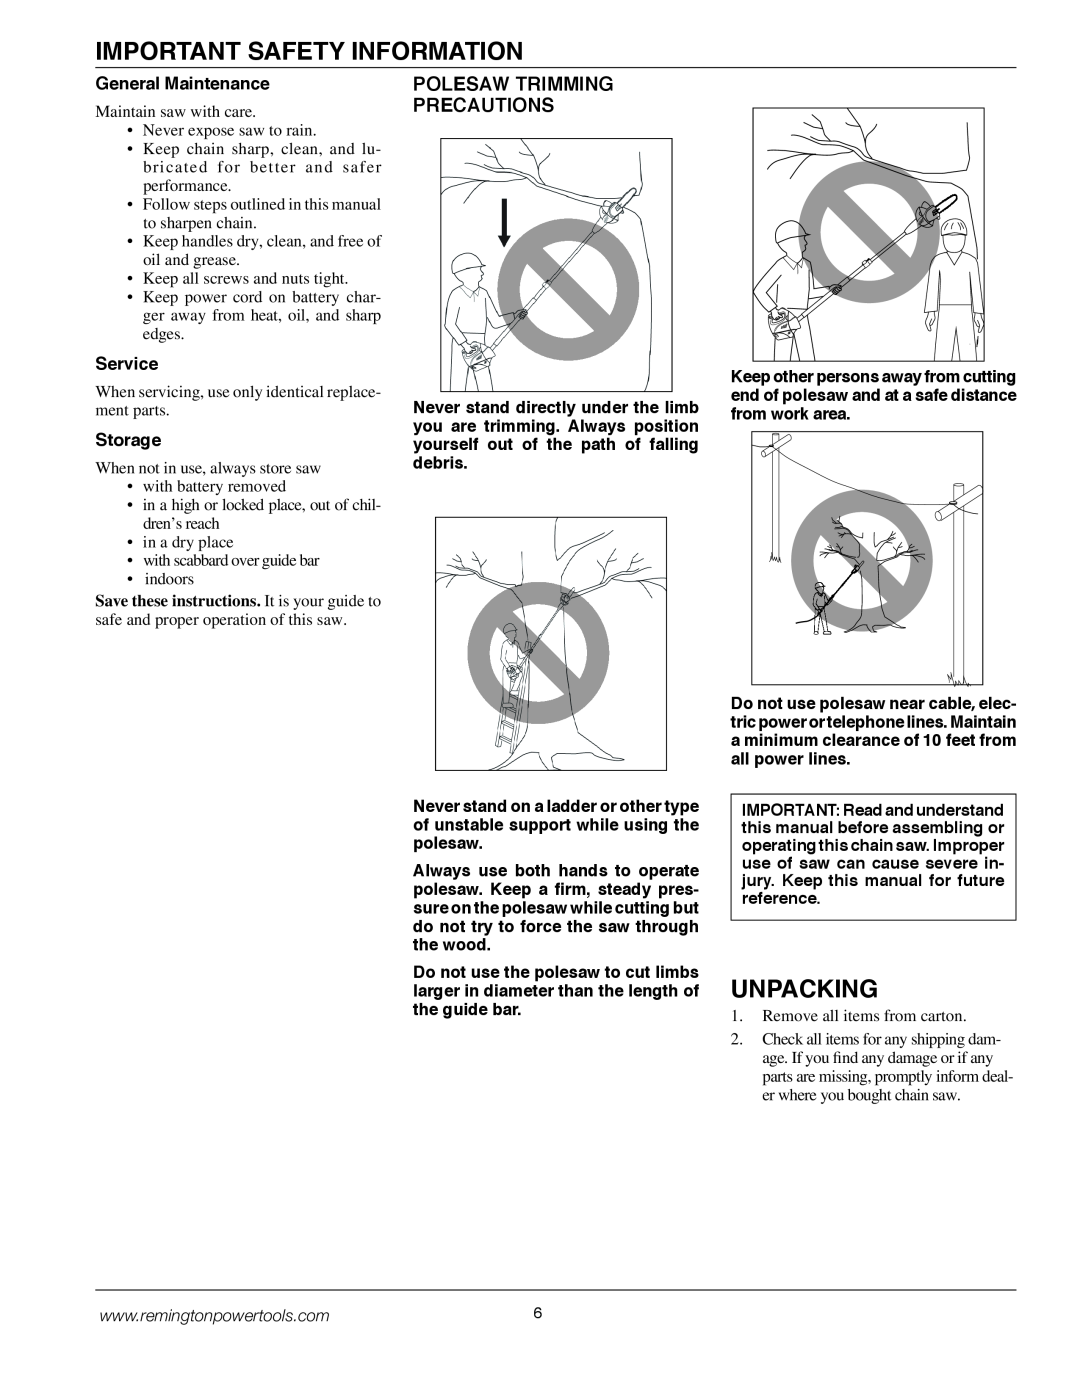 Remington BPS188A Important Safety Information, Unpacking, Polesaw Trimming Precautions, General Maintenance, Service 